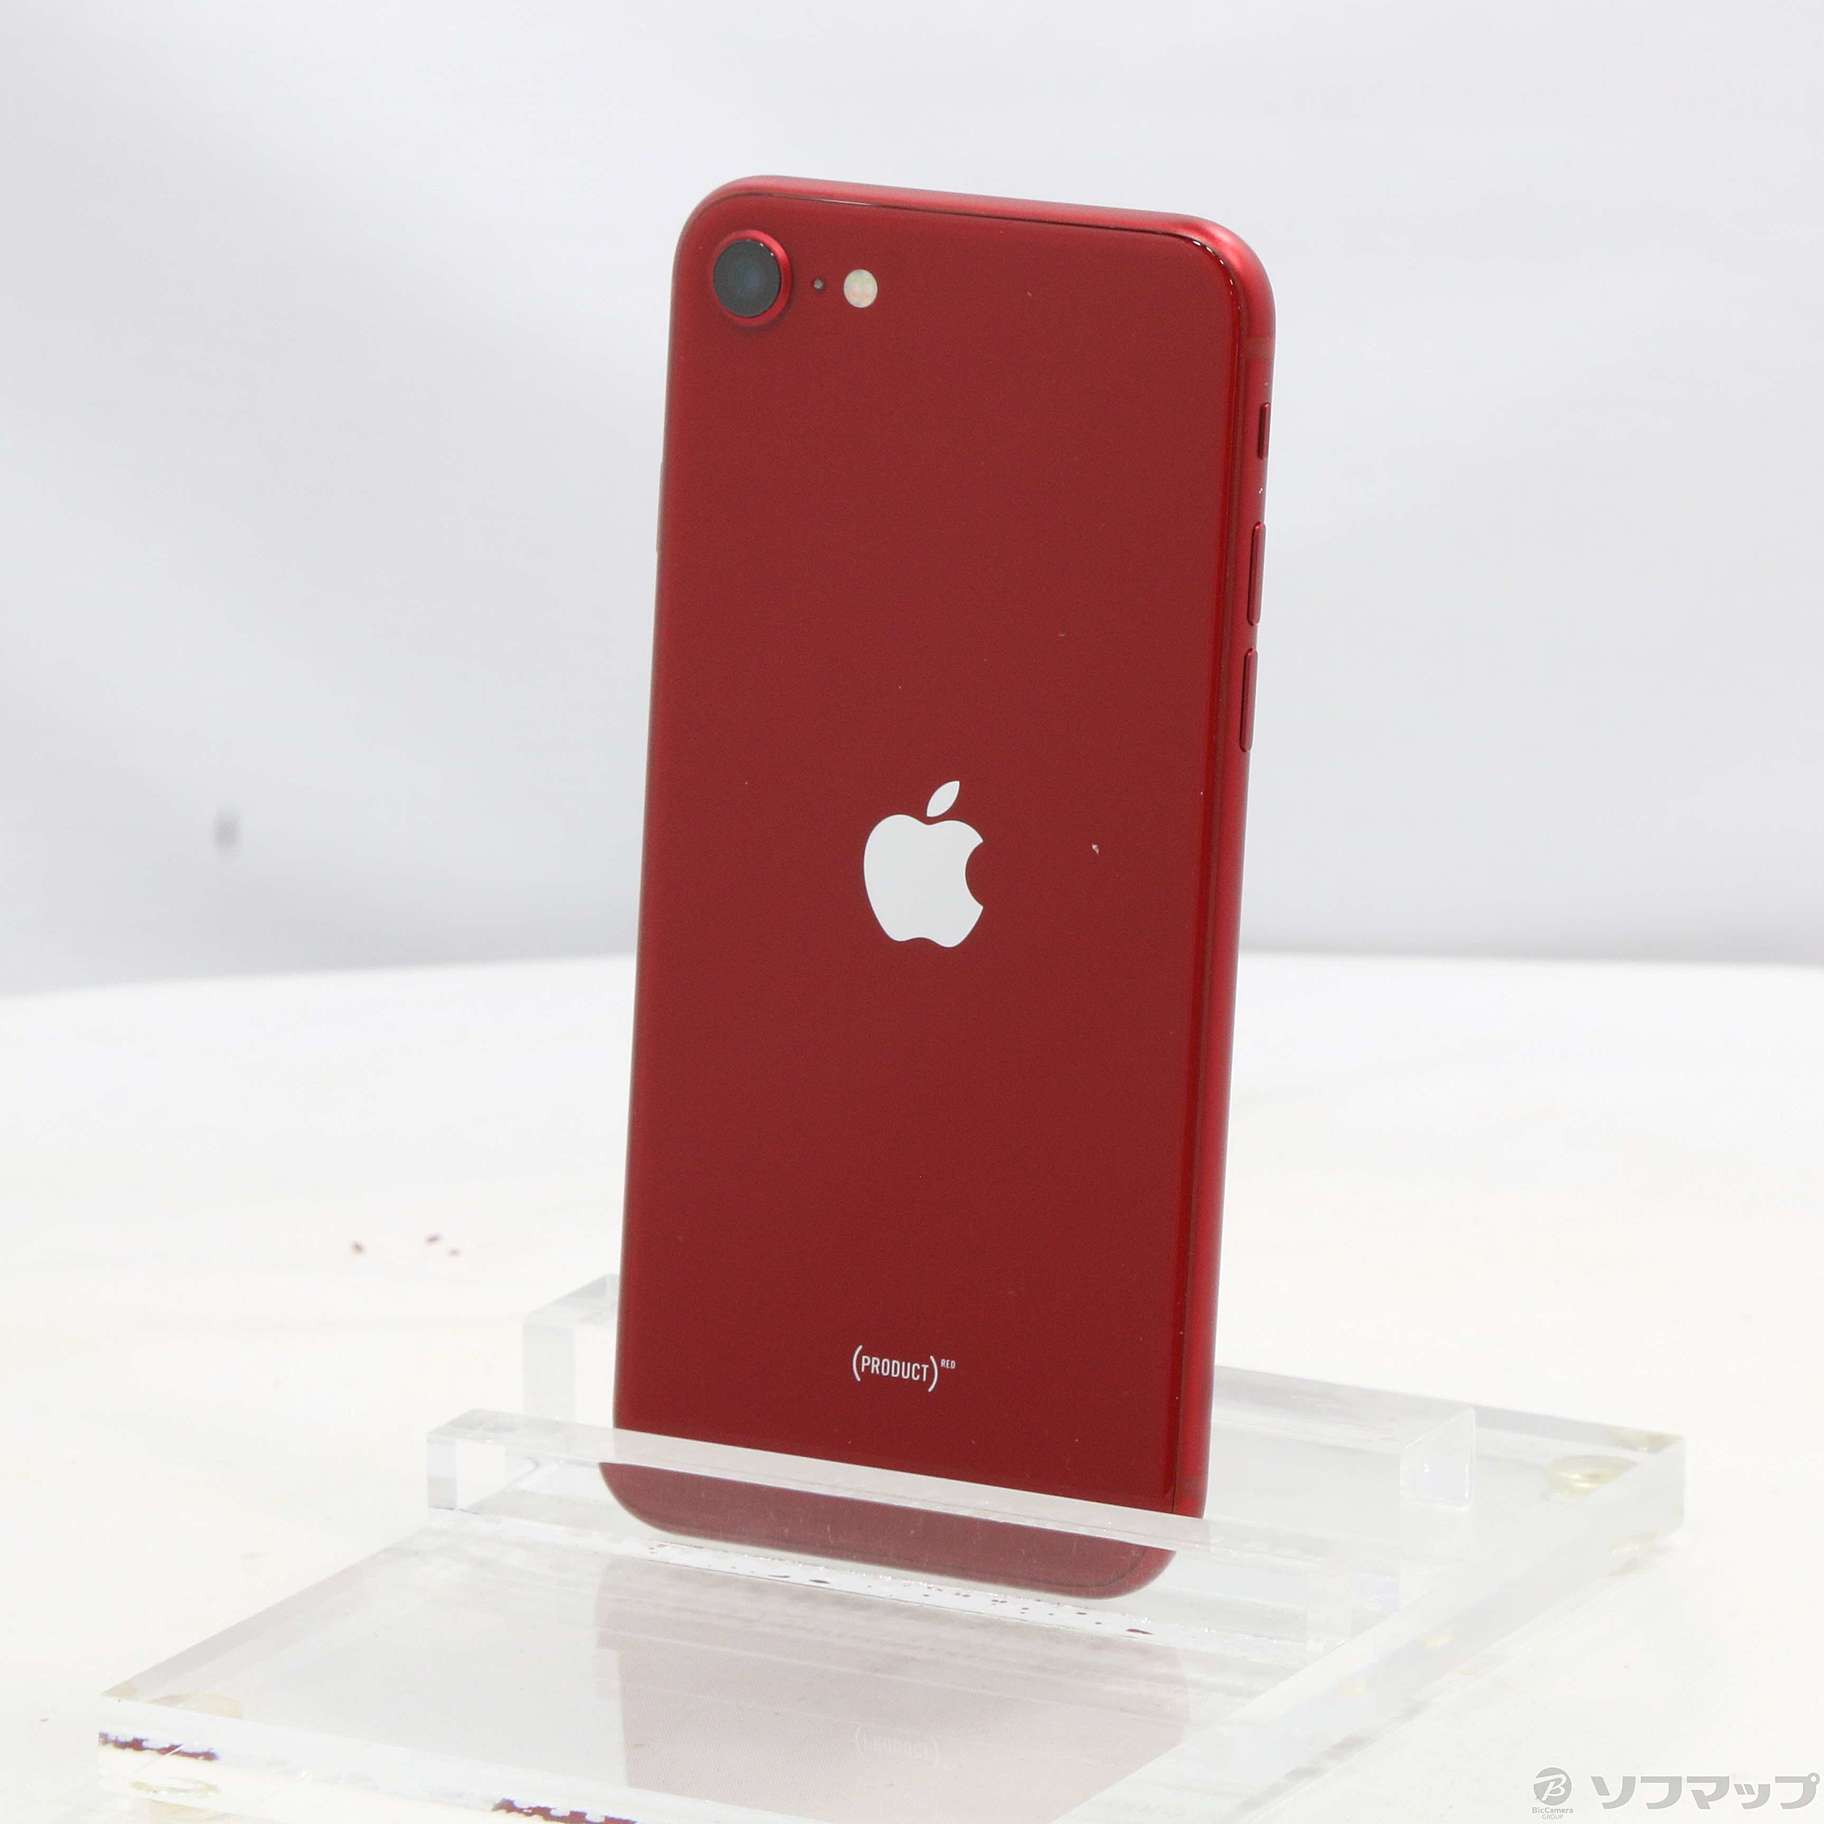 Apple iPhone SE 第3世代 64GB (PRODUCT)RED … | nate-hospital.com